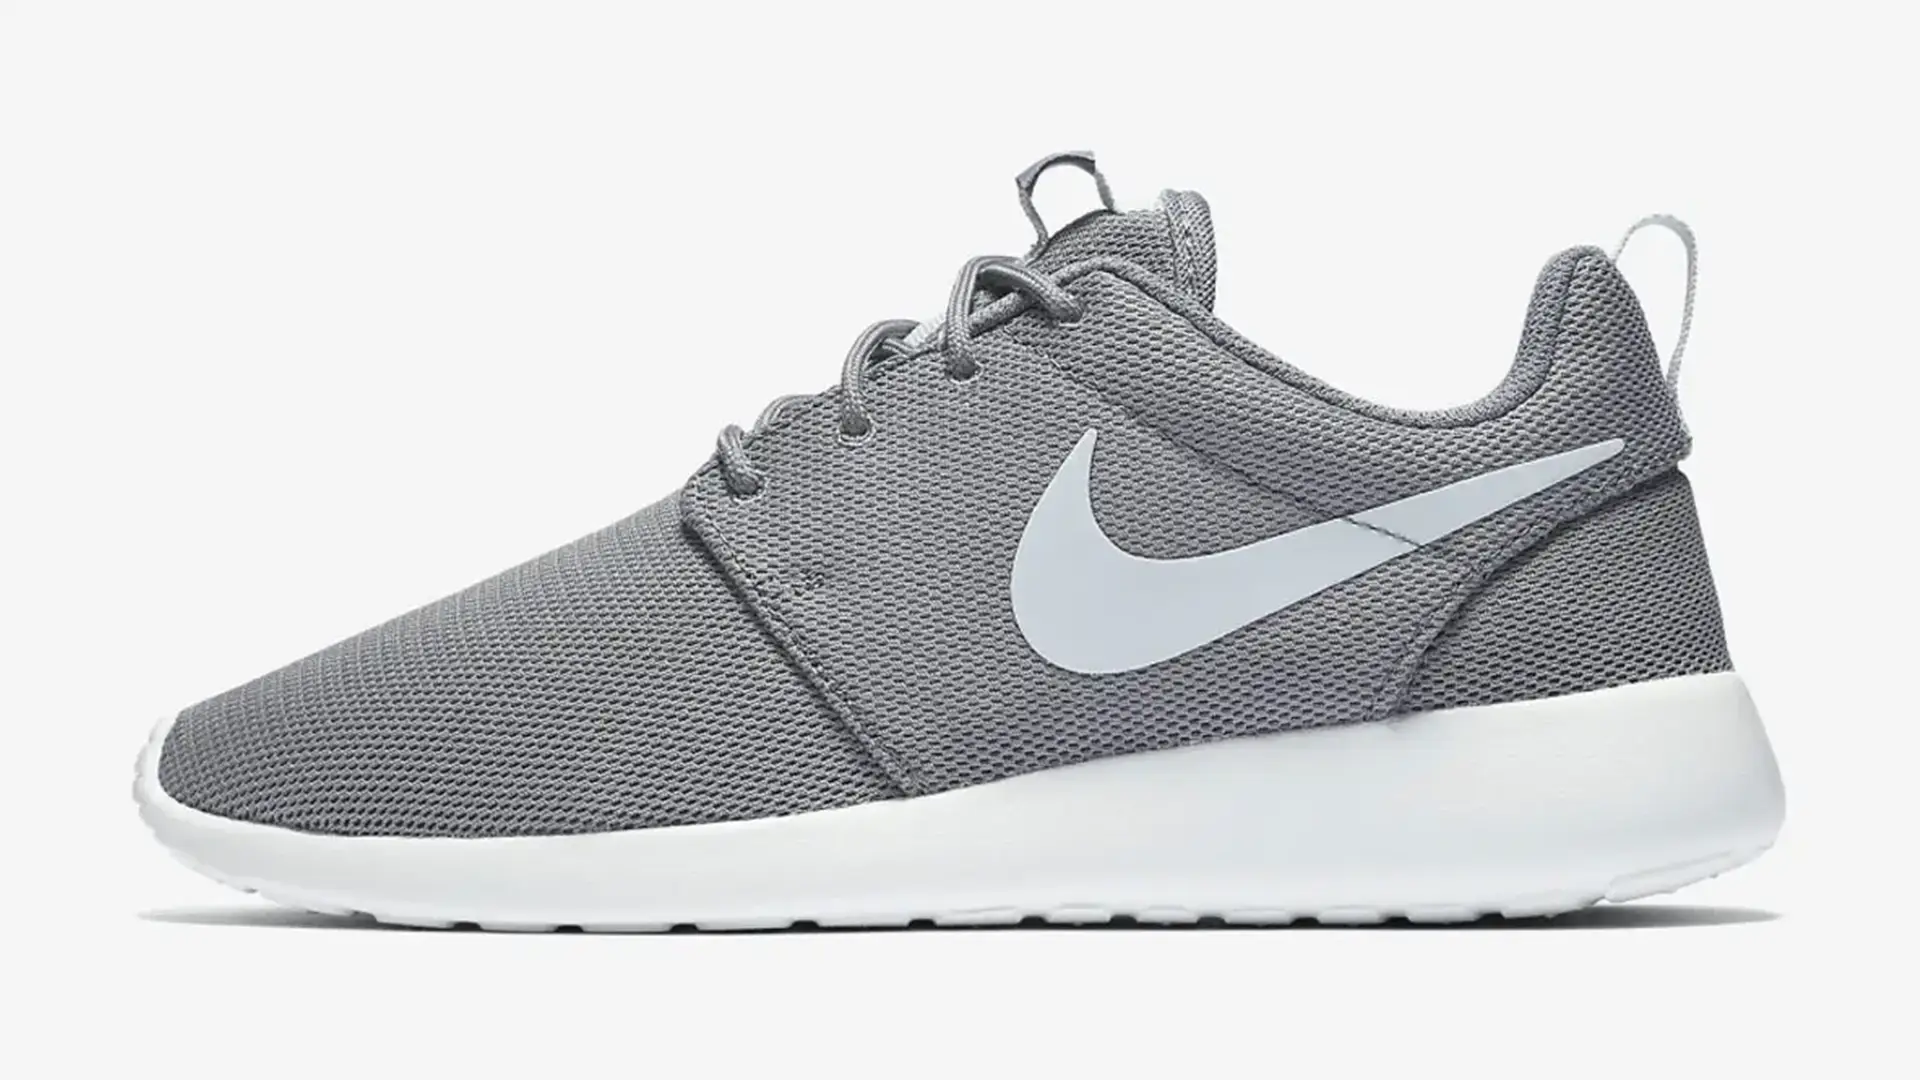 The Nike Roshe Run Is Ready for a Comeback